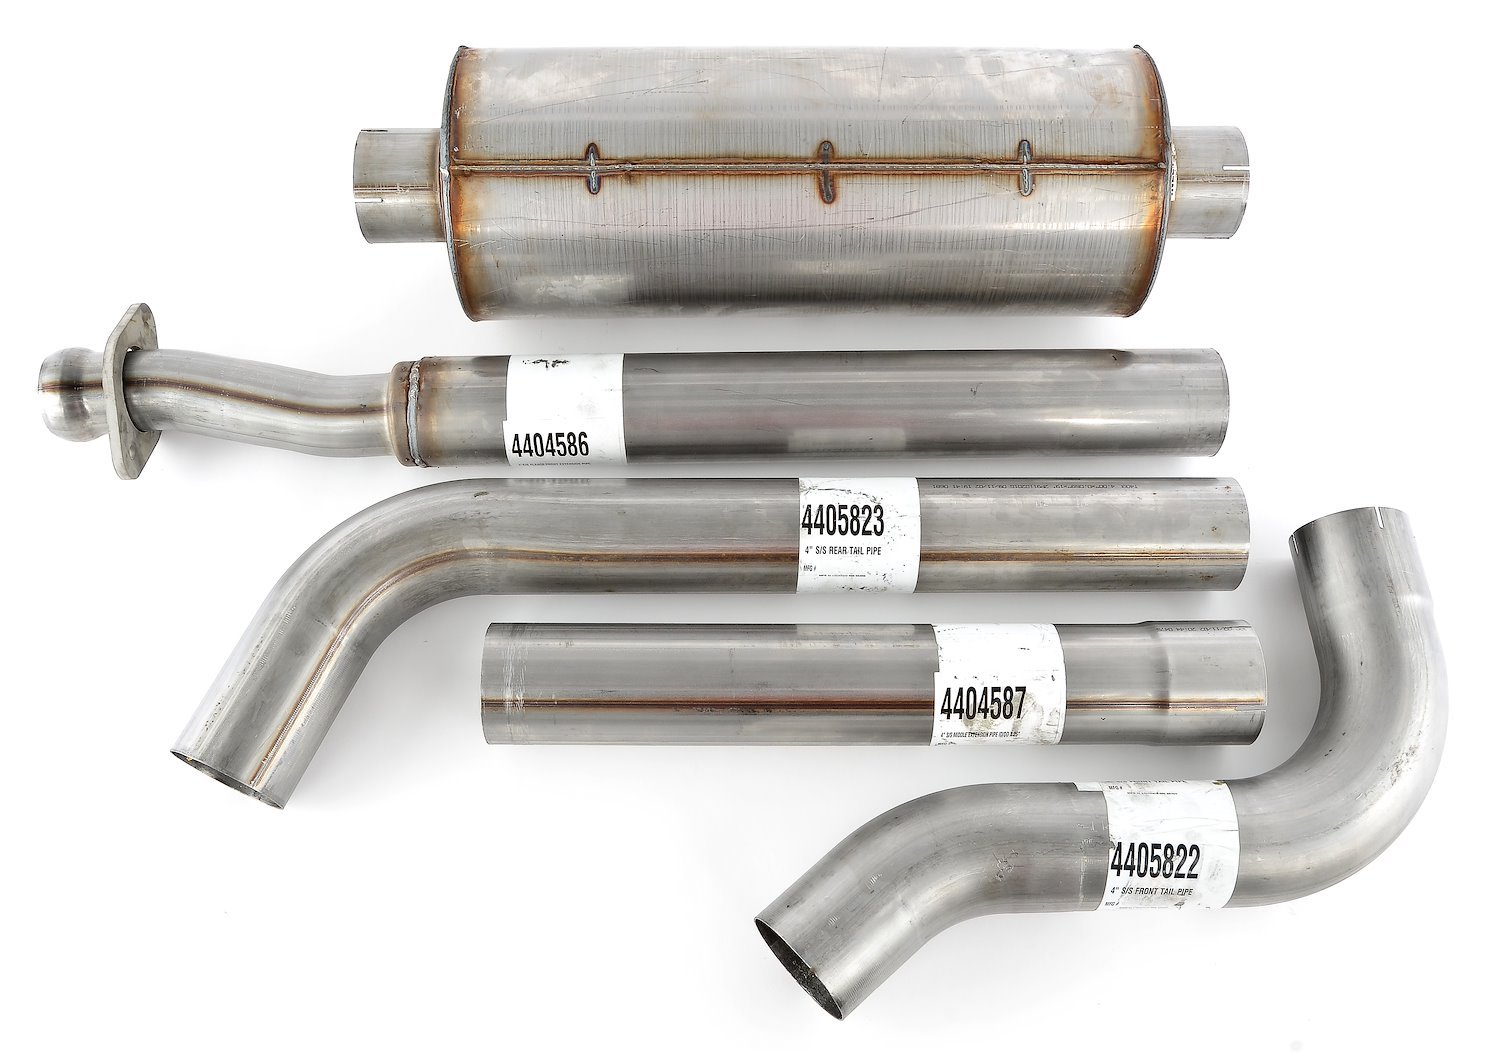 Cat-Back 4 in. Single Exhaust System for 2011-2014 Ford F-150 Twin Turbo EcoBoost 3.5L V6 and Coyote Ti-VCT 5.0L V8